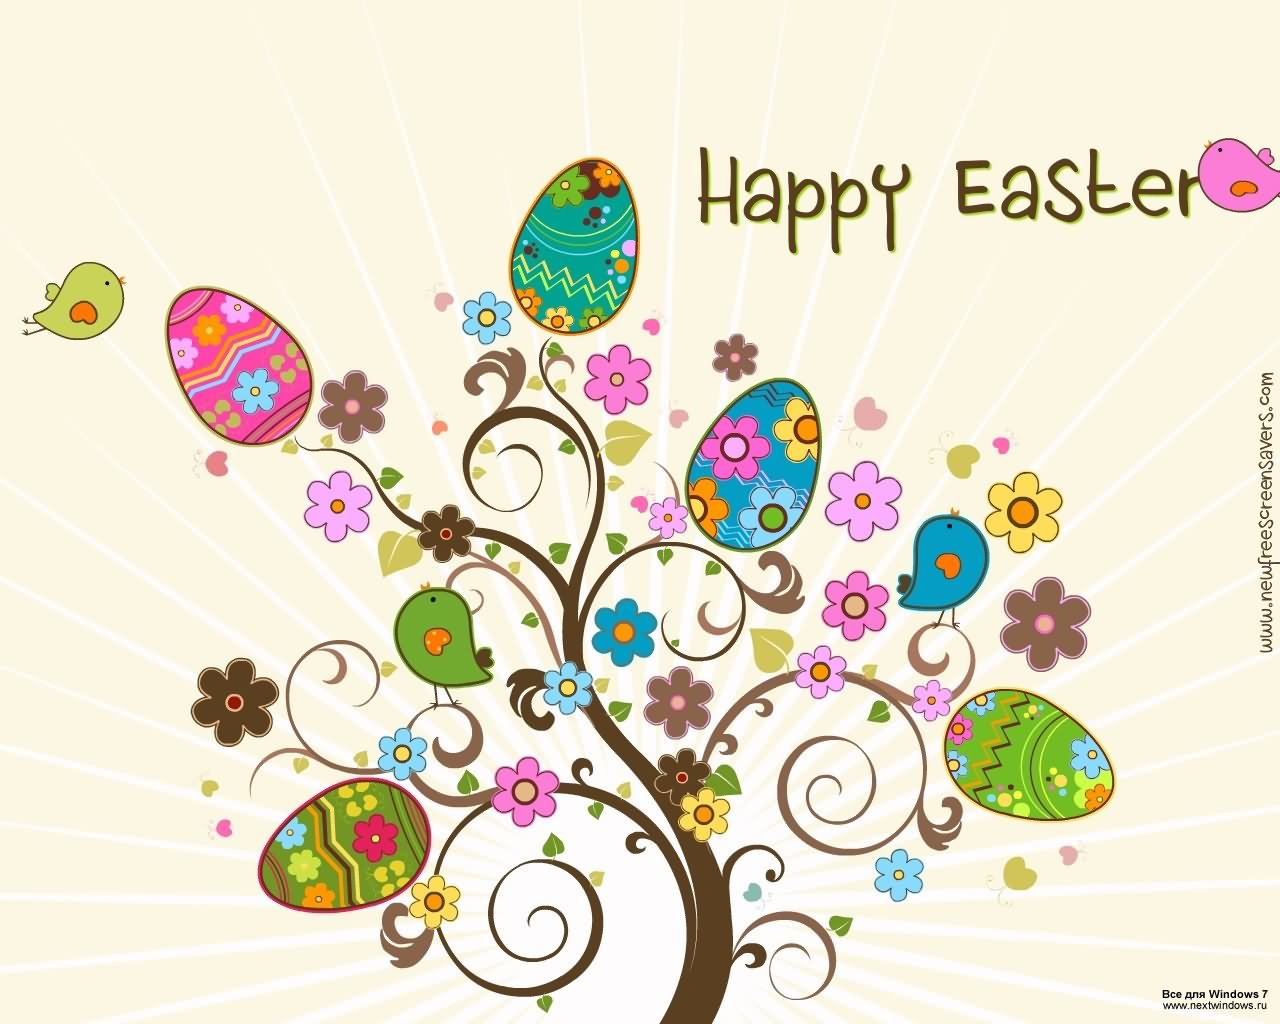 2016 clipart easter. Happy eggs tree picture